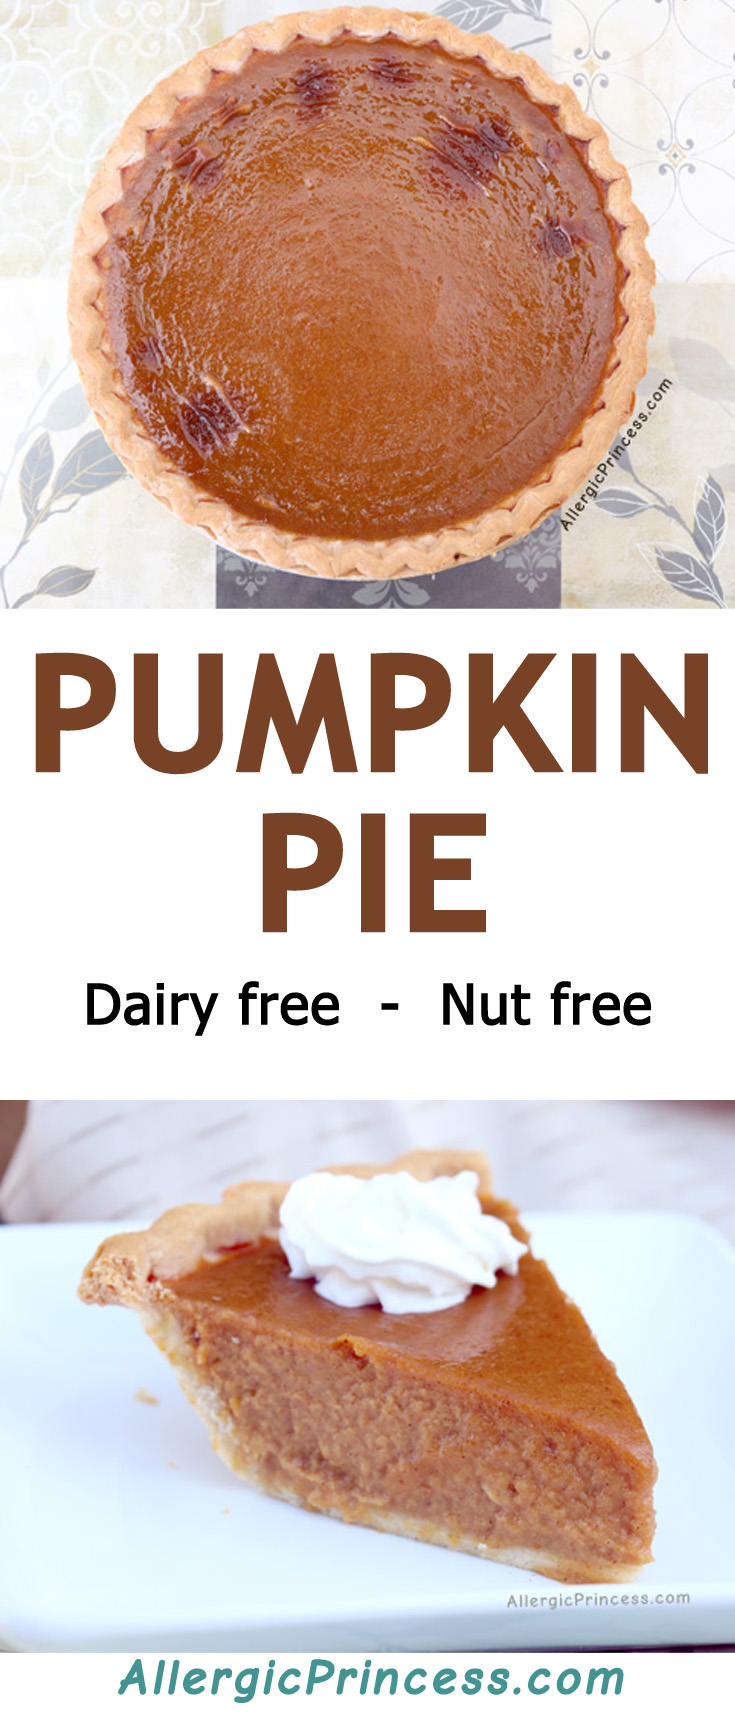 A dairy free, nut free mouth-watering pumpkin pie will really hit the spot!